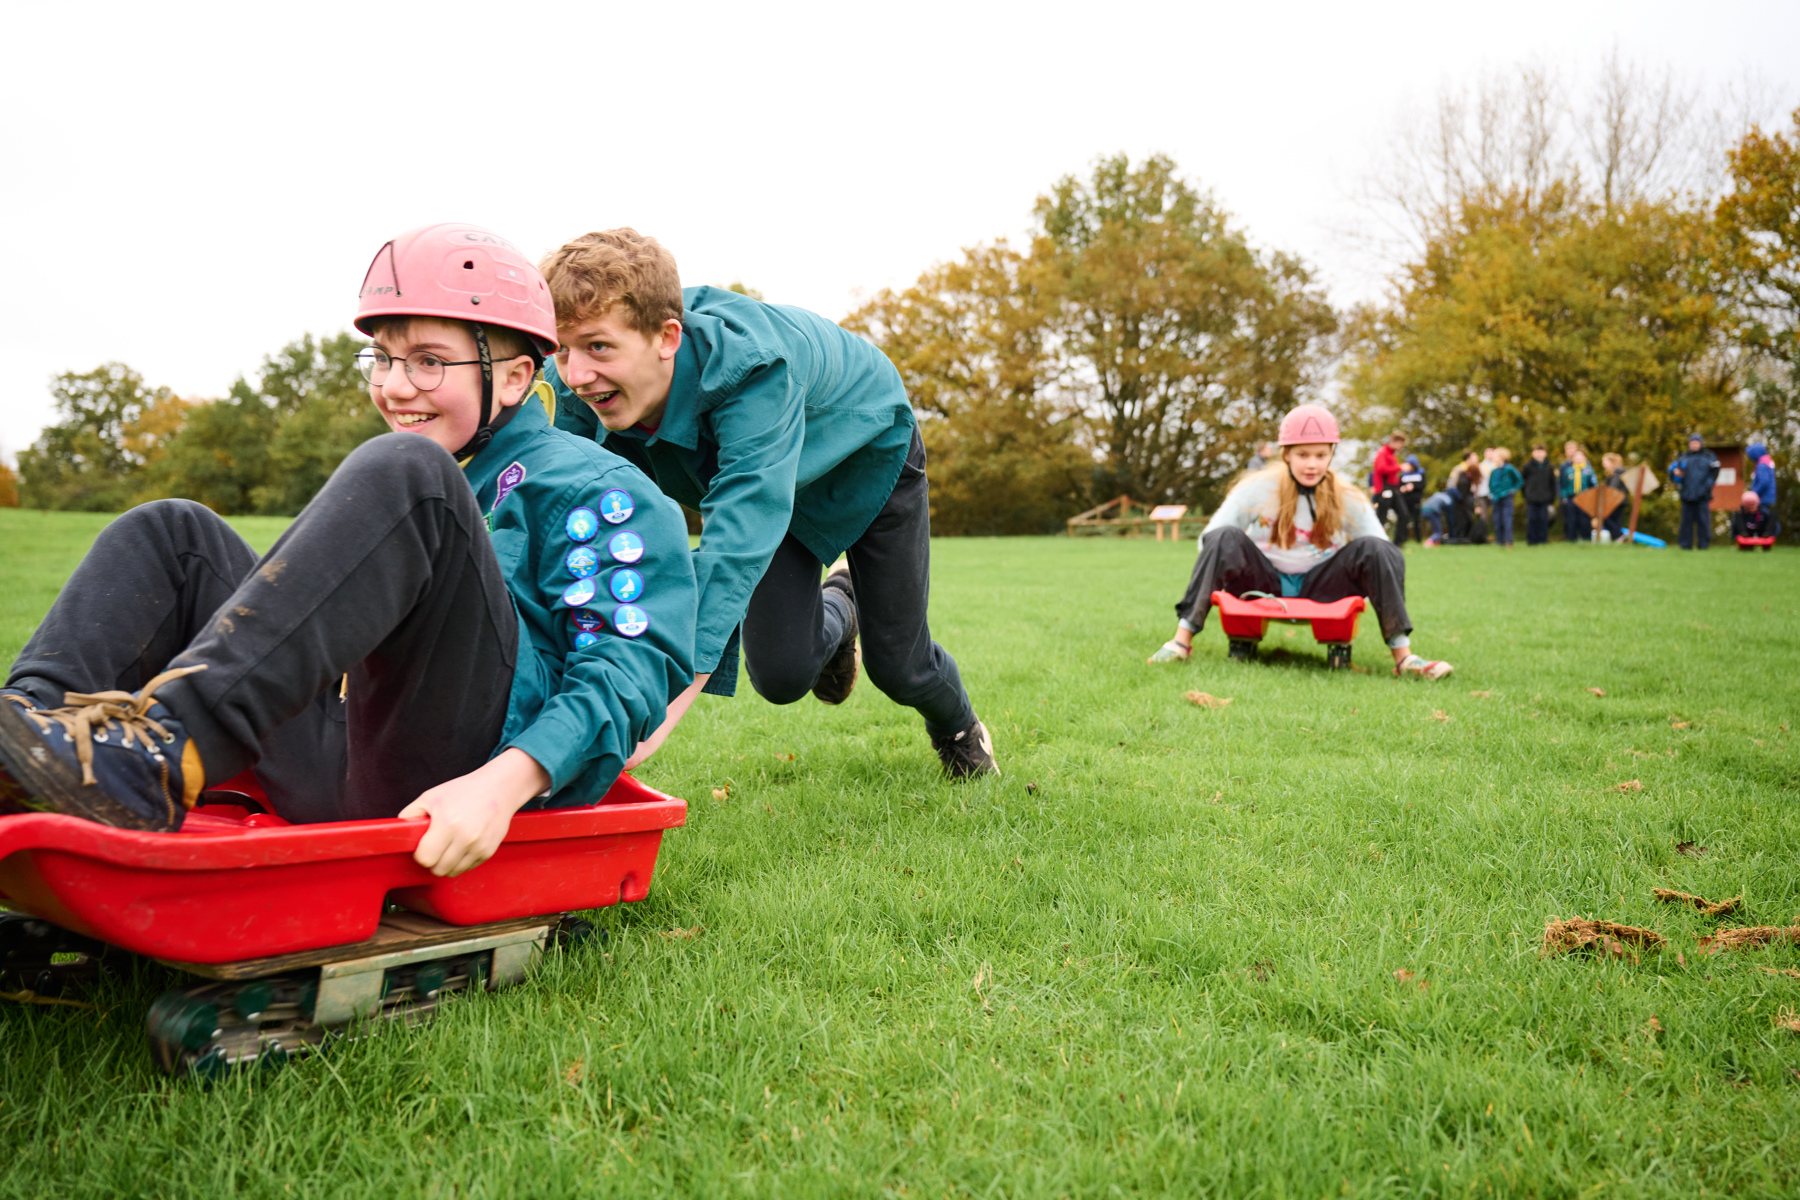 To the left, a Scout is sat on a red sledge wearing uniform and a pink helmet. Another Scout is pushing them down a grassy hill, leaning forwards. To the right, there's another Scout on a red sledge in the background, wearing a grey jumper and trousers, and a pink helmet. There are trees in the background and more young people at the top of the hill.